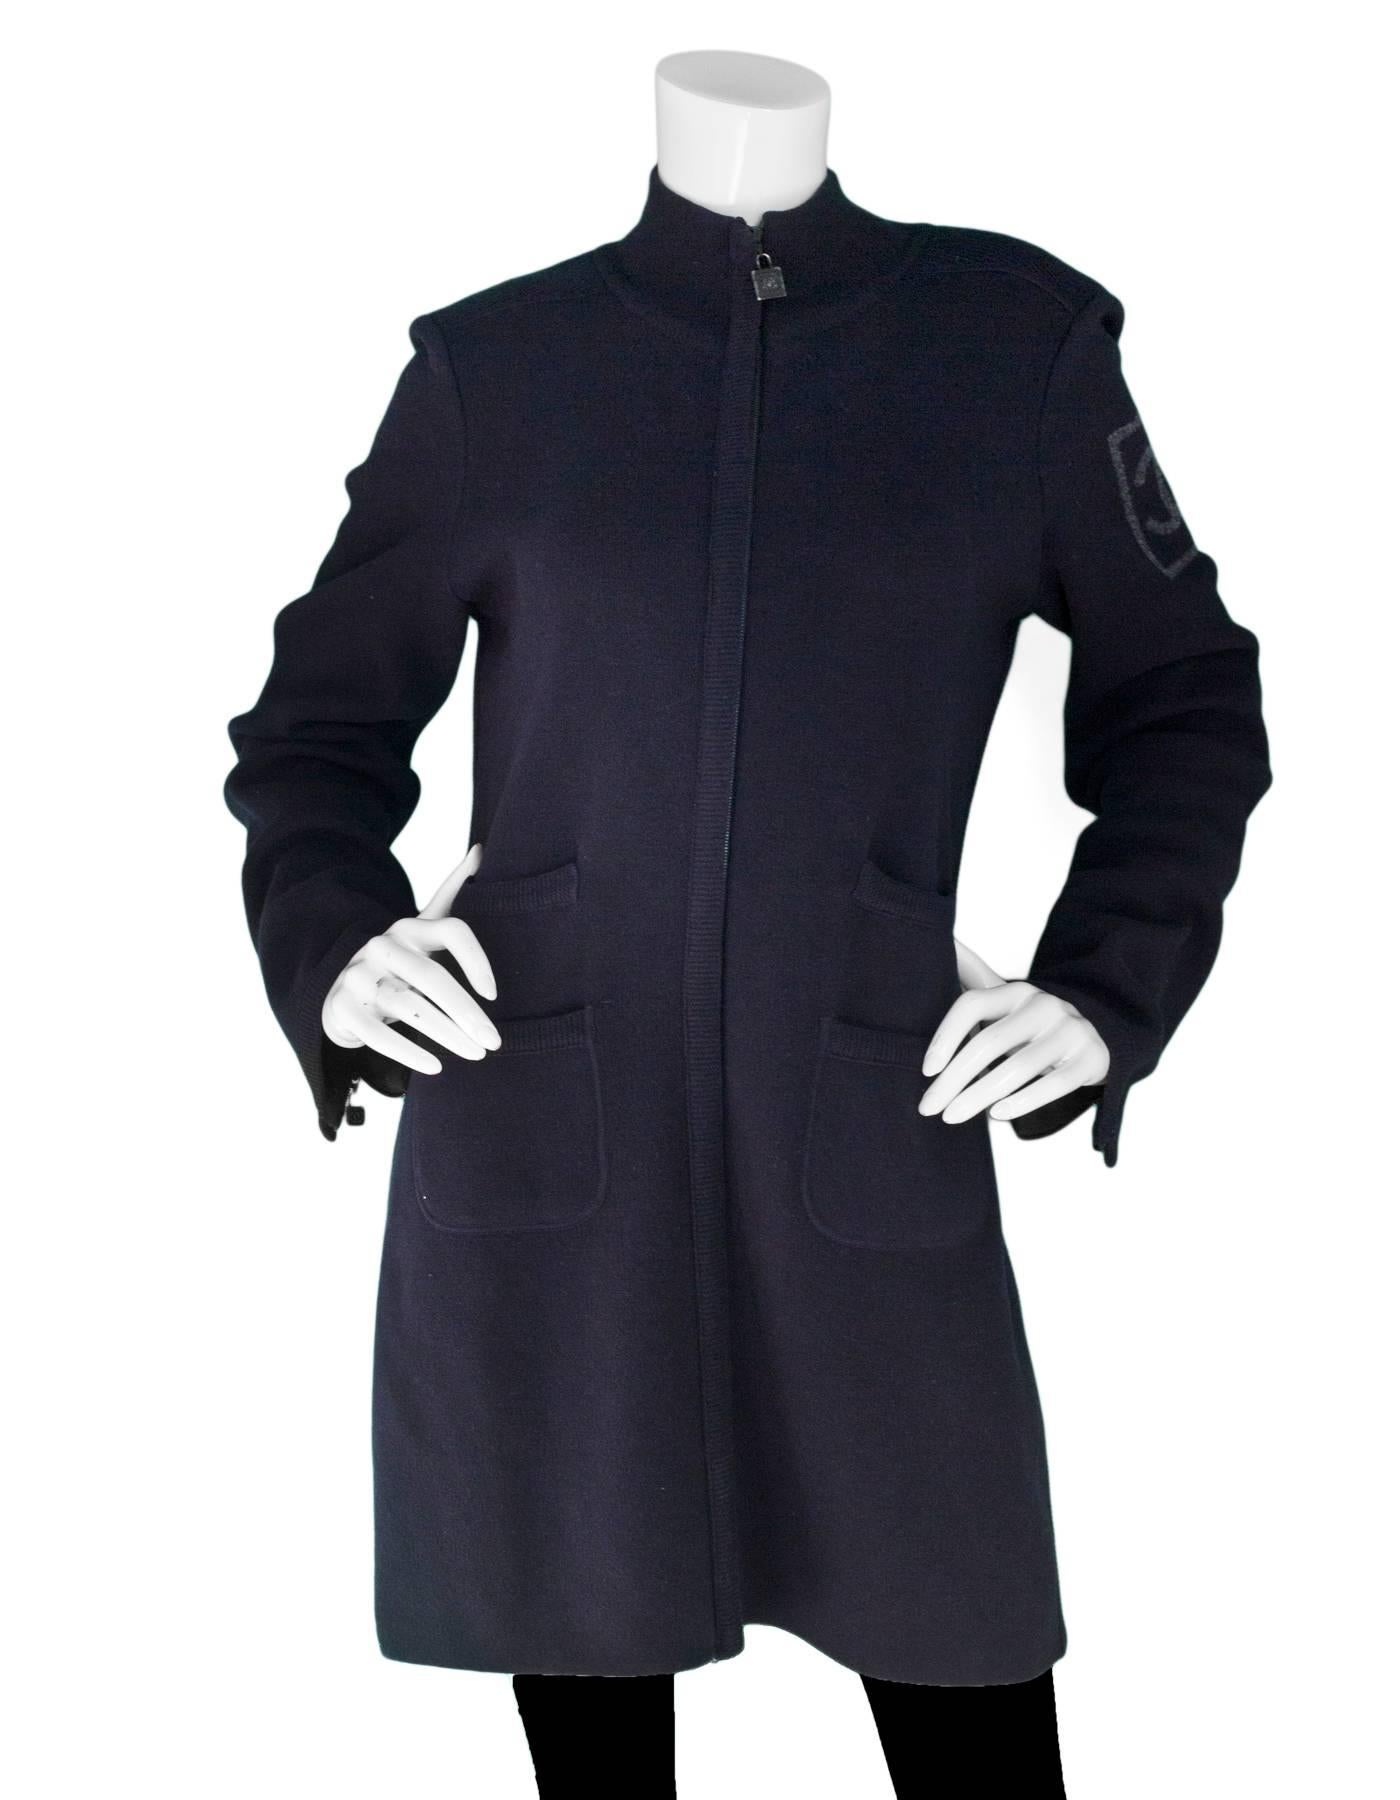 Chanel Sport Navy Wool Long Sweater Coat Sz FR42

Made In: Italy
Year Of Production: 2008
Color: Navy
Materials: 100% Wool
Lining: None
Closure/Opening: Front zip closure
Exterior Pockets: Four slit pockets
Overall Condition: Excellent pre-owned